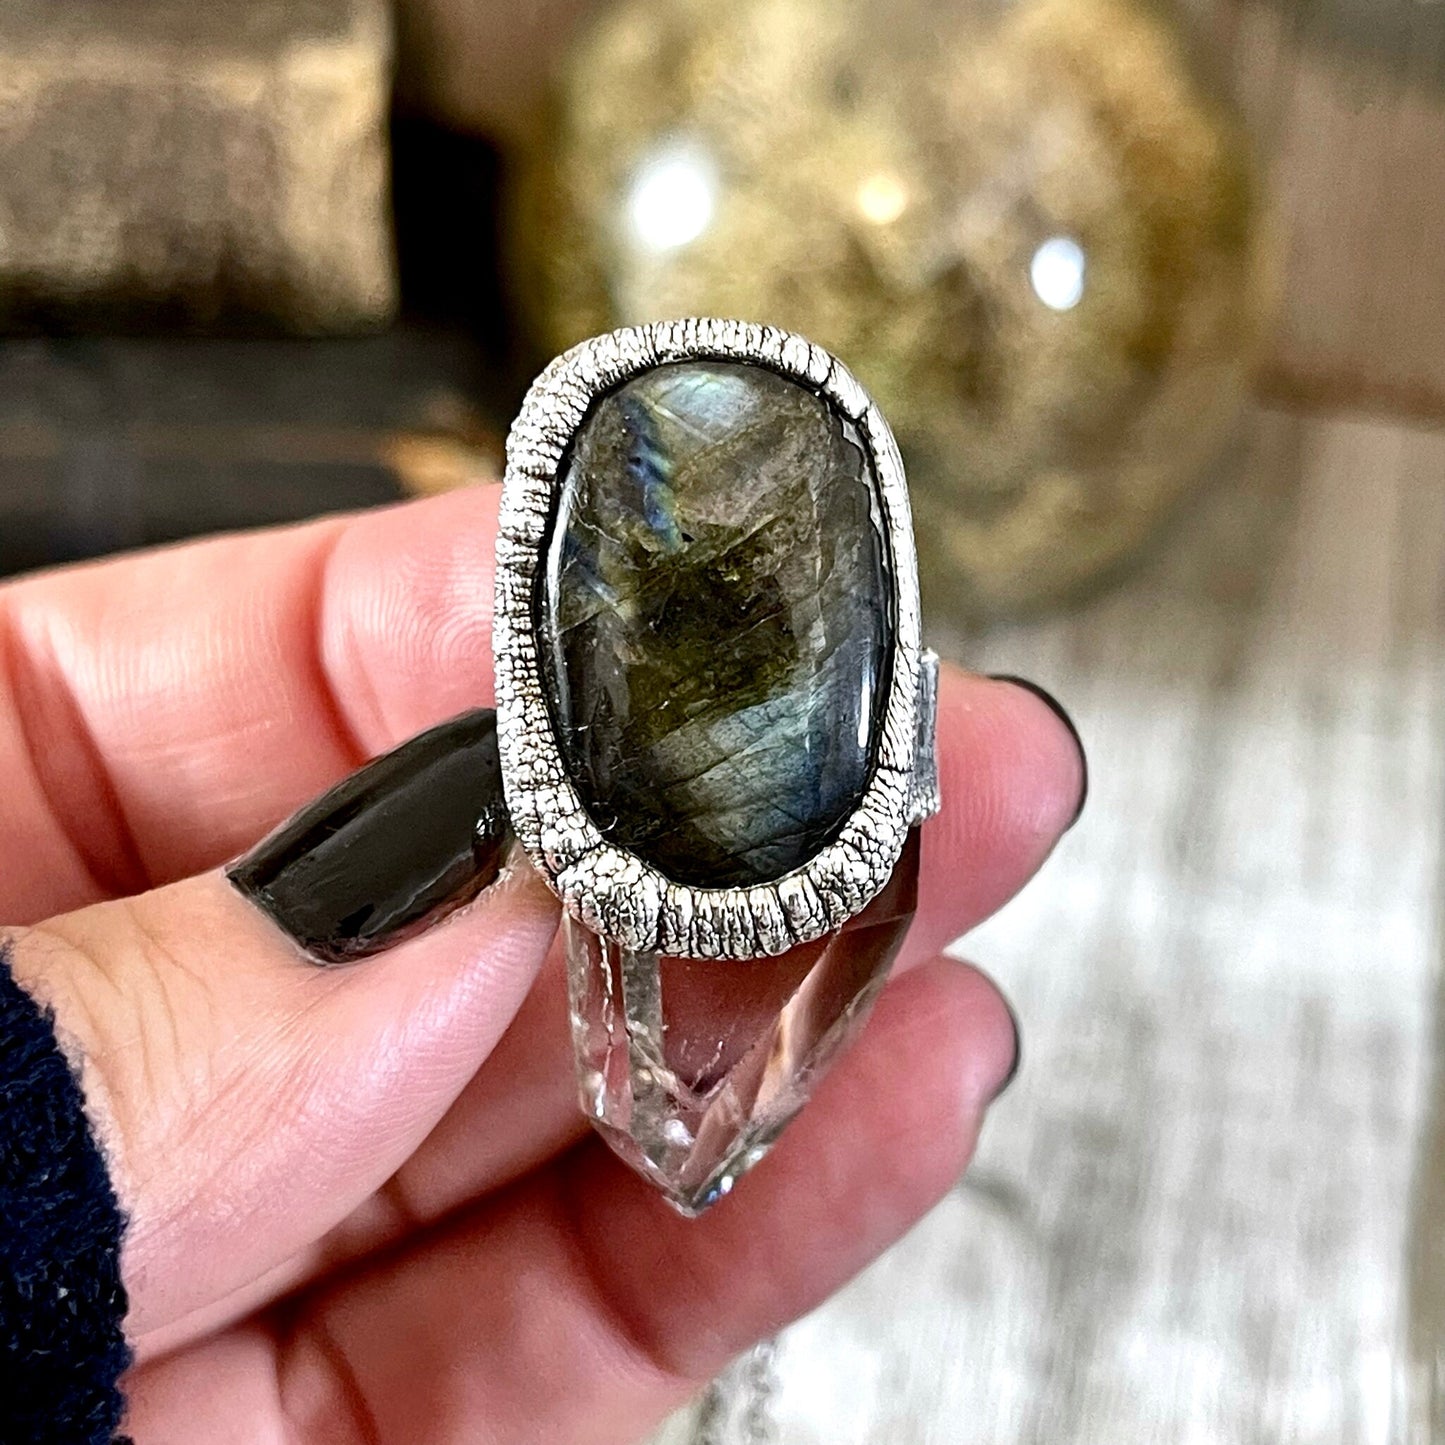 Clear Quartz & Green Labradorite Crystal Statement Necklace in Fine Silver / Foxlark Collection - One of a Kind - Foxlark Crystal Jewelry